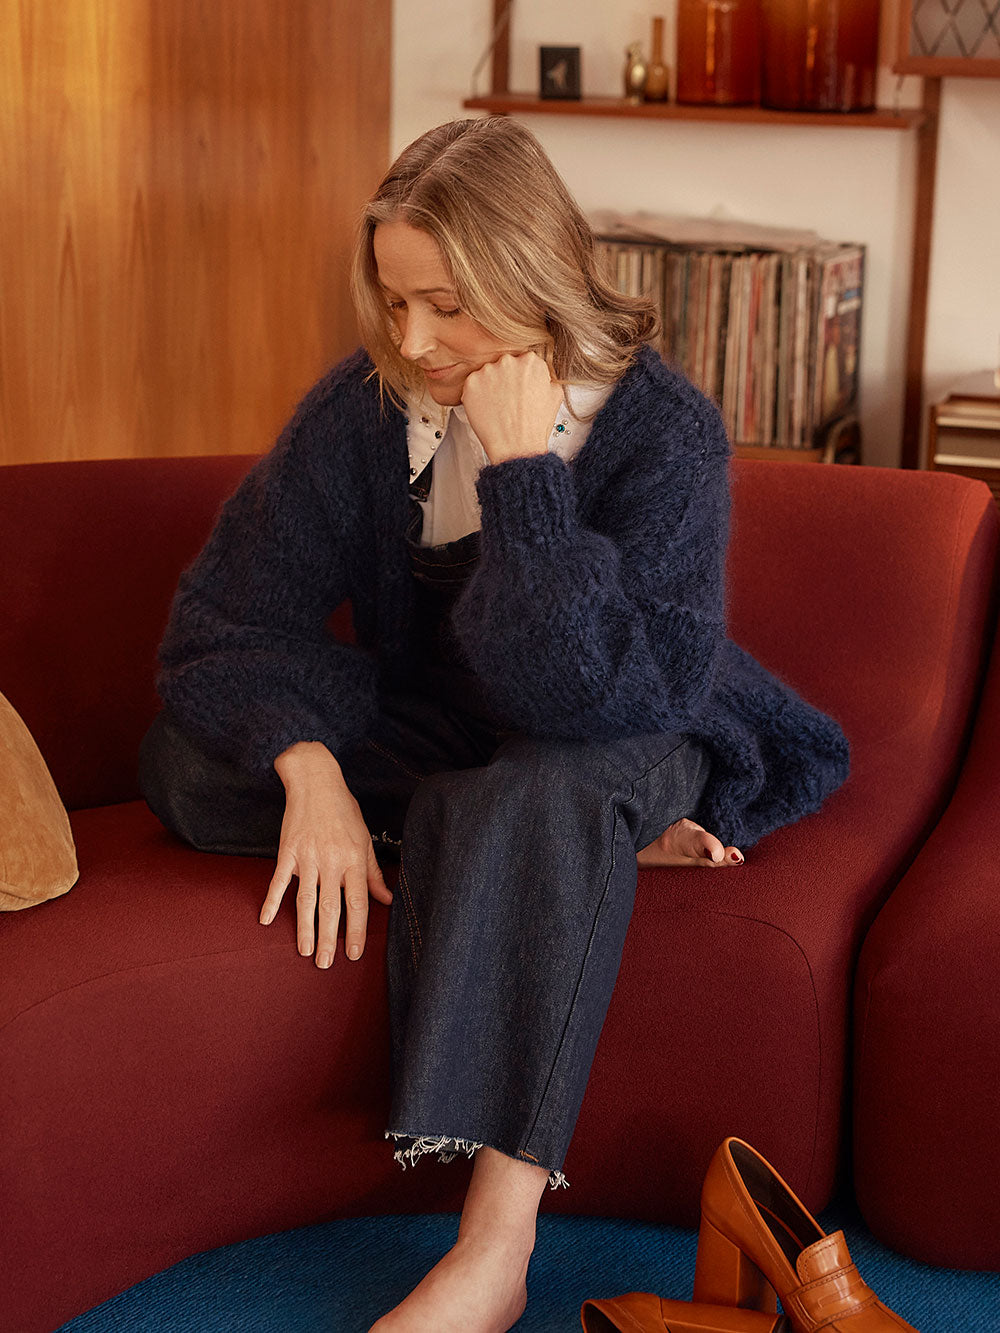 Woman sits on red couch, she is smiling at the camera and wearing a navy blue knitted mohair cardigan and denim overalls with a white collared shirt.